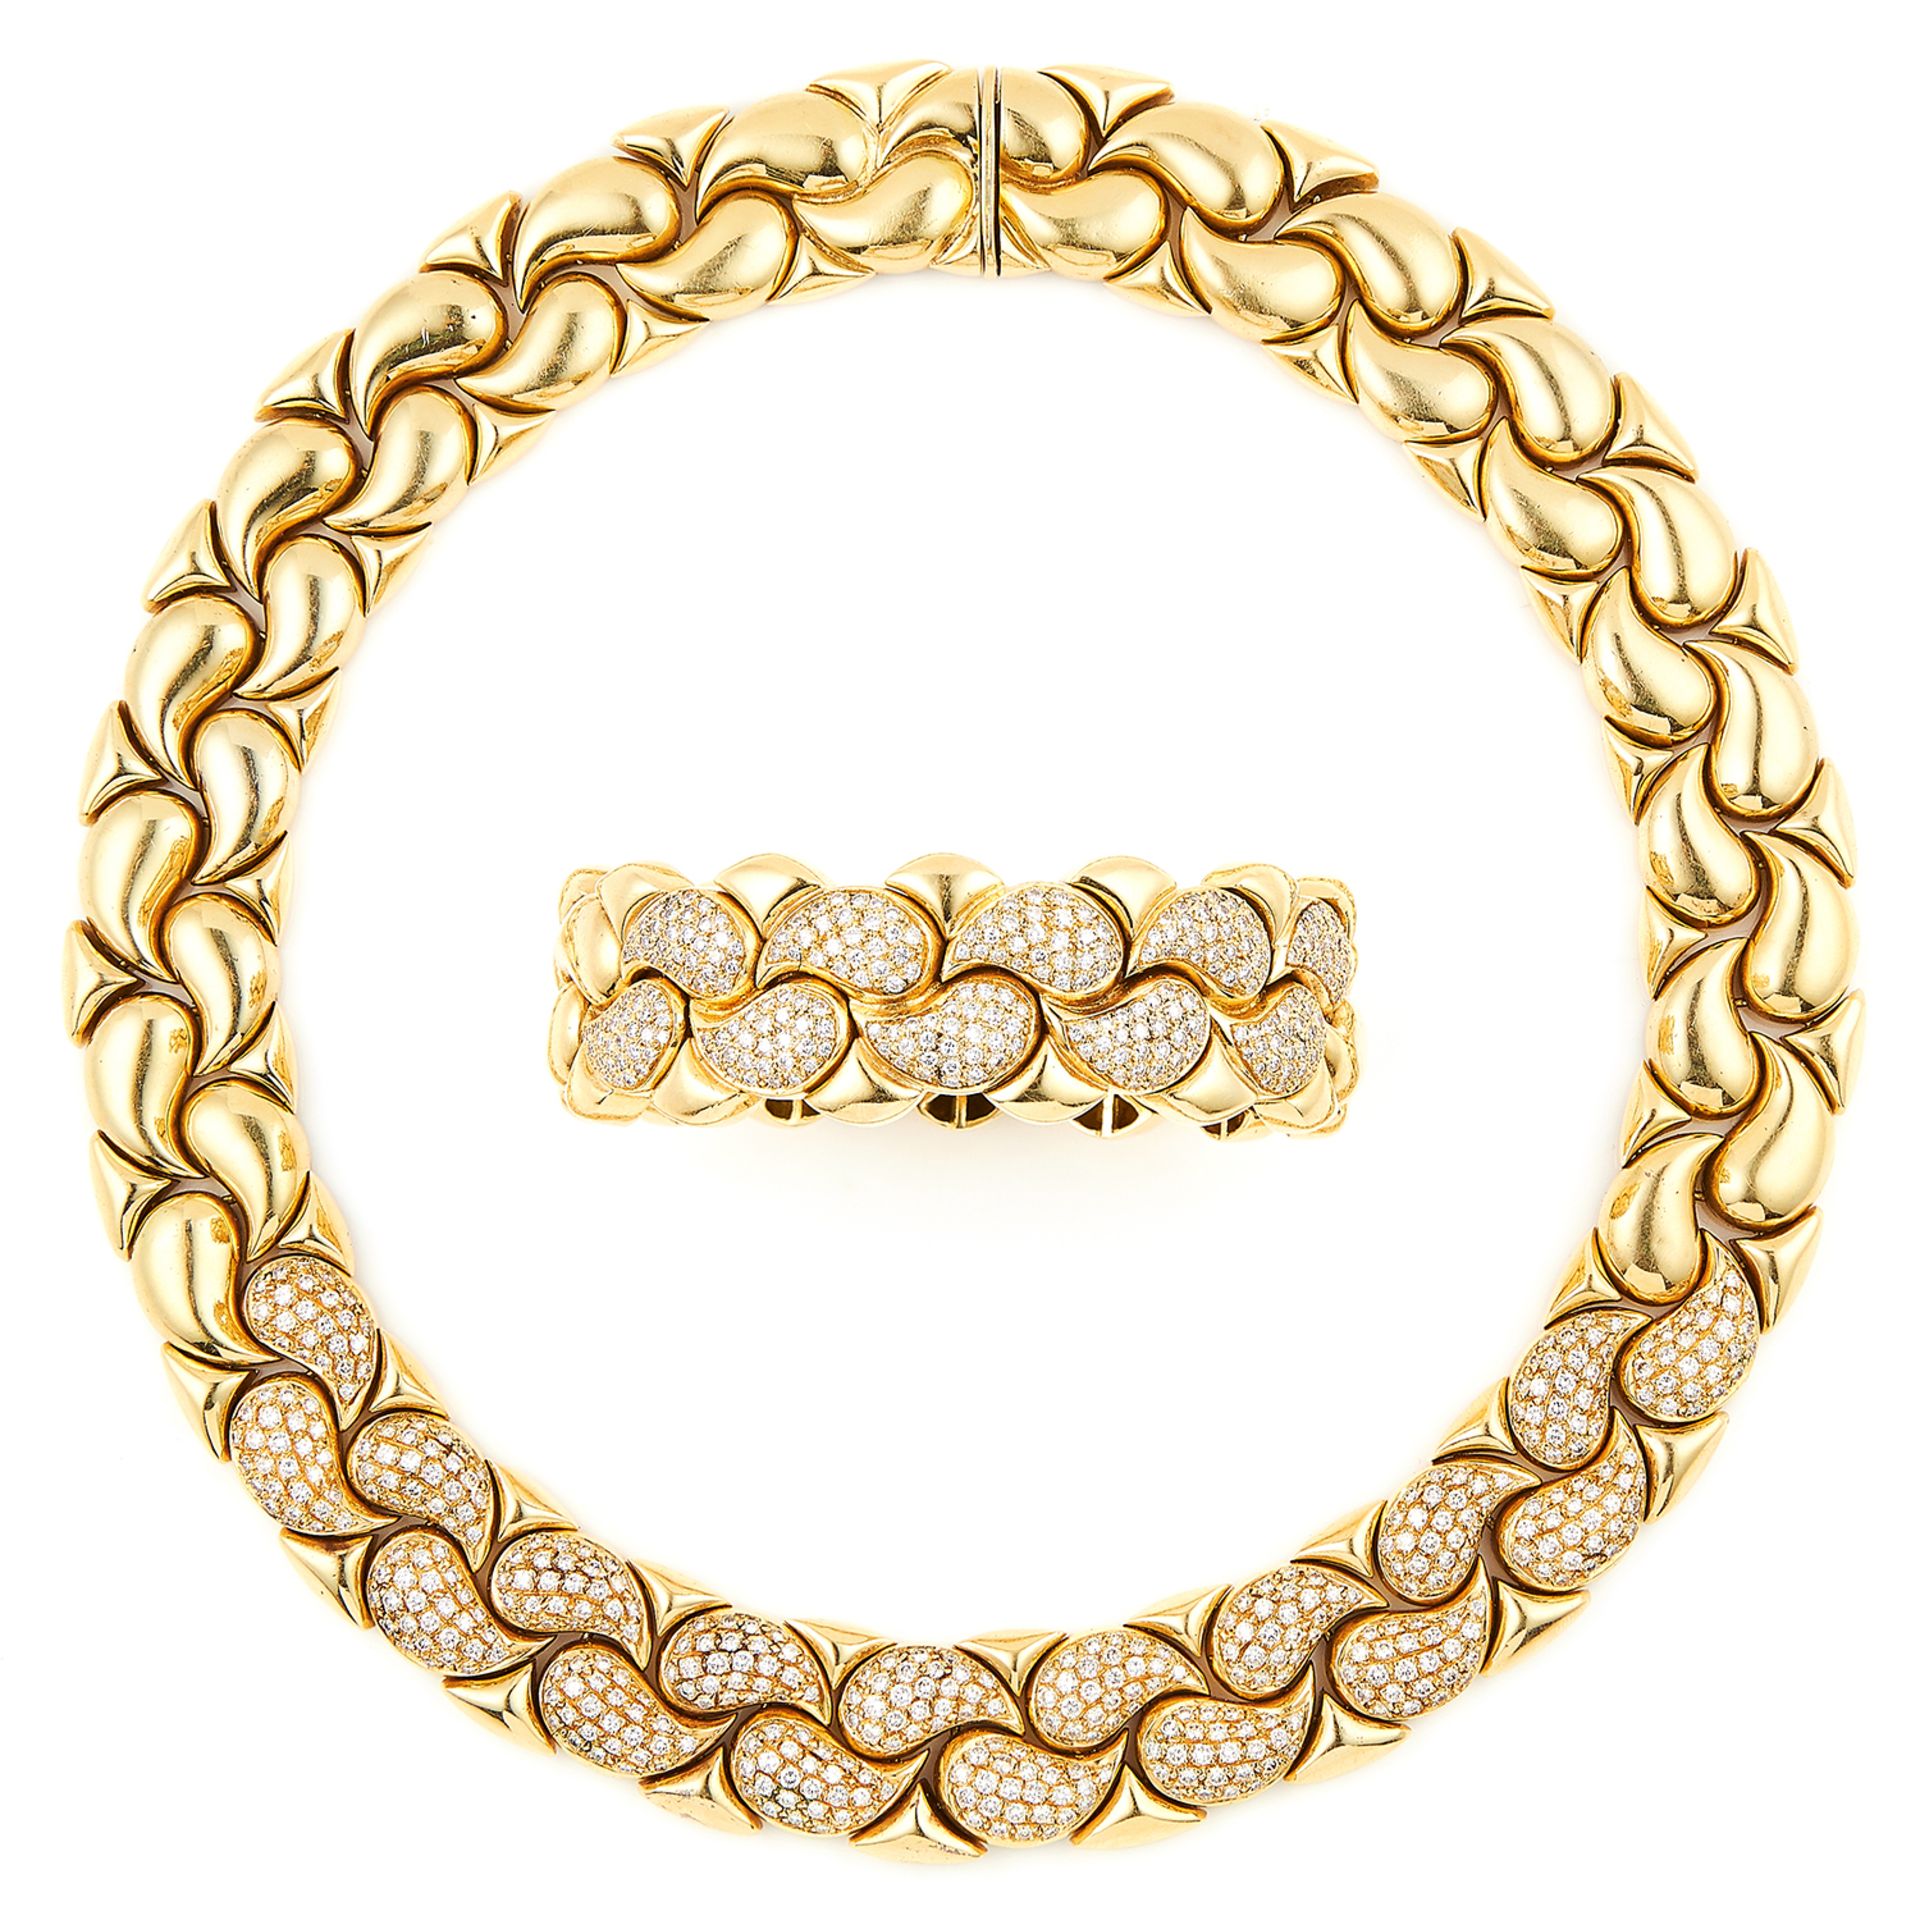 'CASMIR' DIAMOND NECKLACE AND BRACELET SUITE in 18ct yellow gold, in the style of Chopard, each